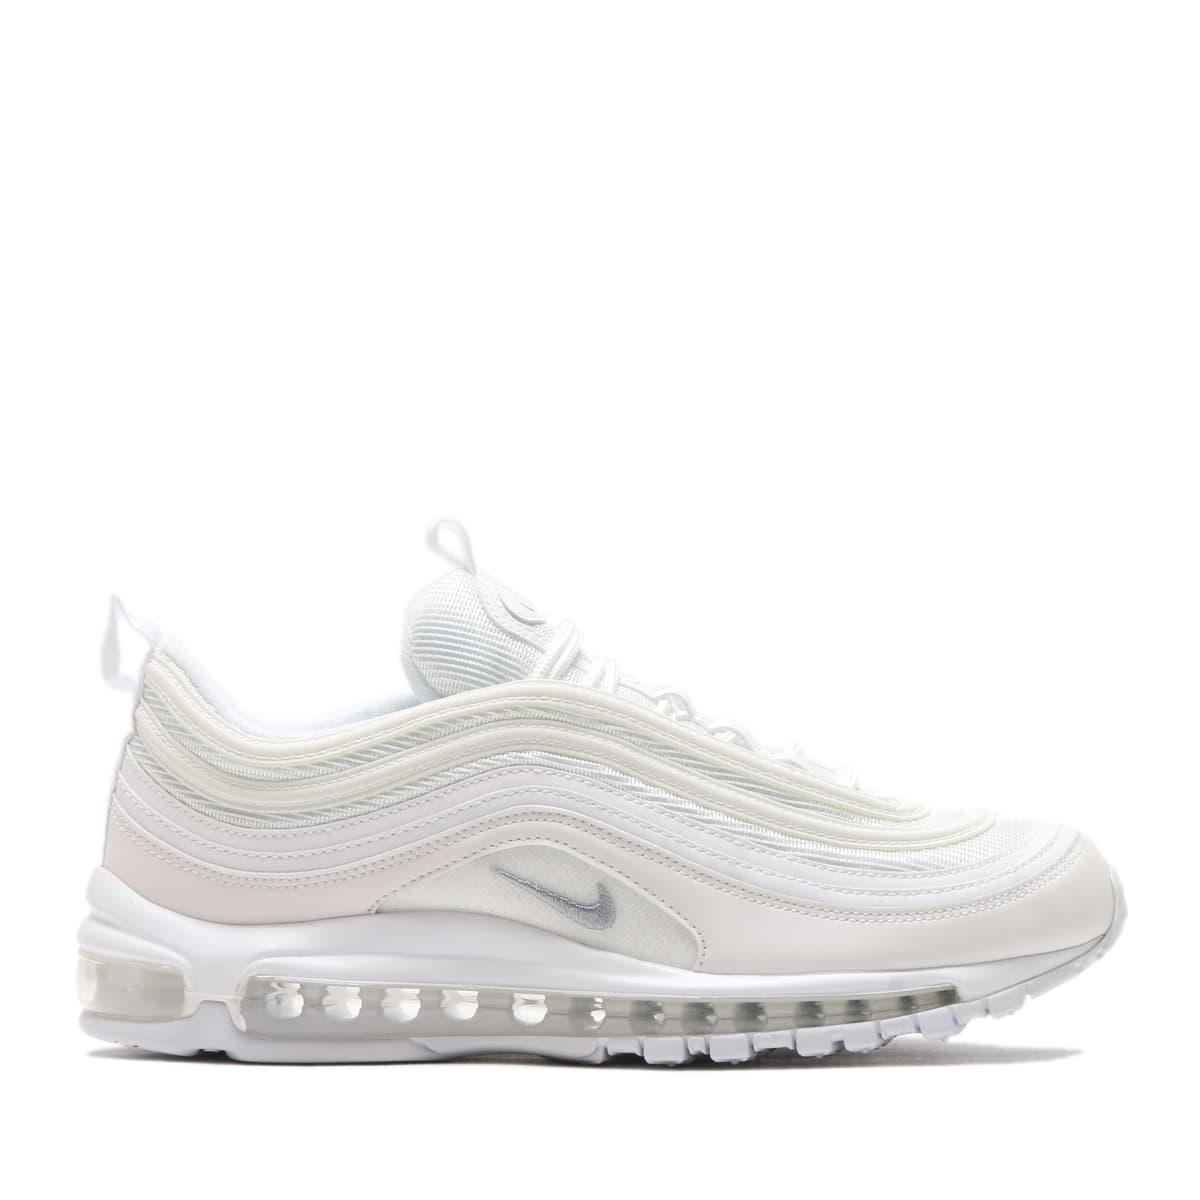 alloy Malfunction In particular NIKE AIR MAX 97 WHITE/WOLF GREY-BLACK 22SU-I